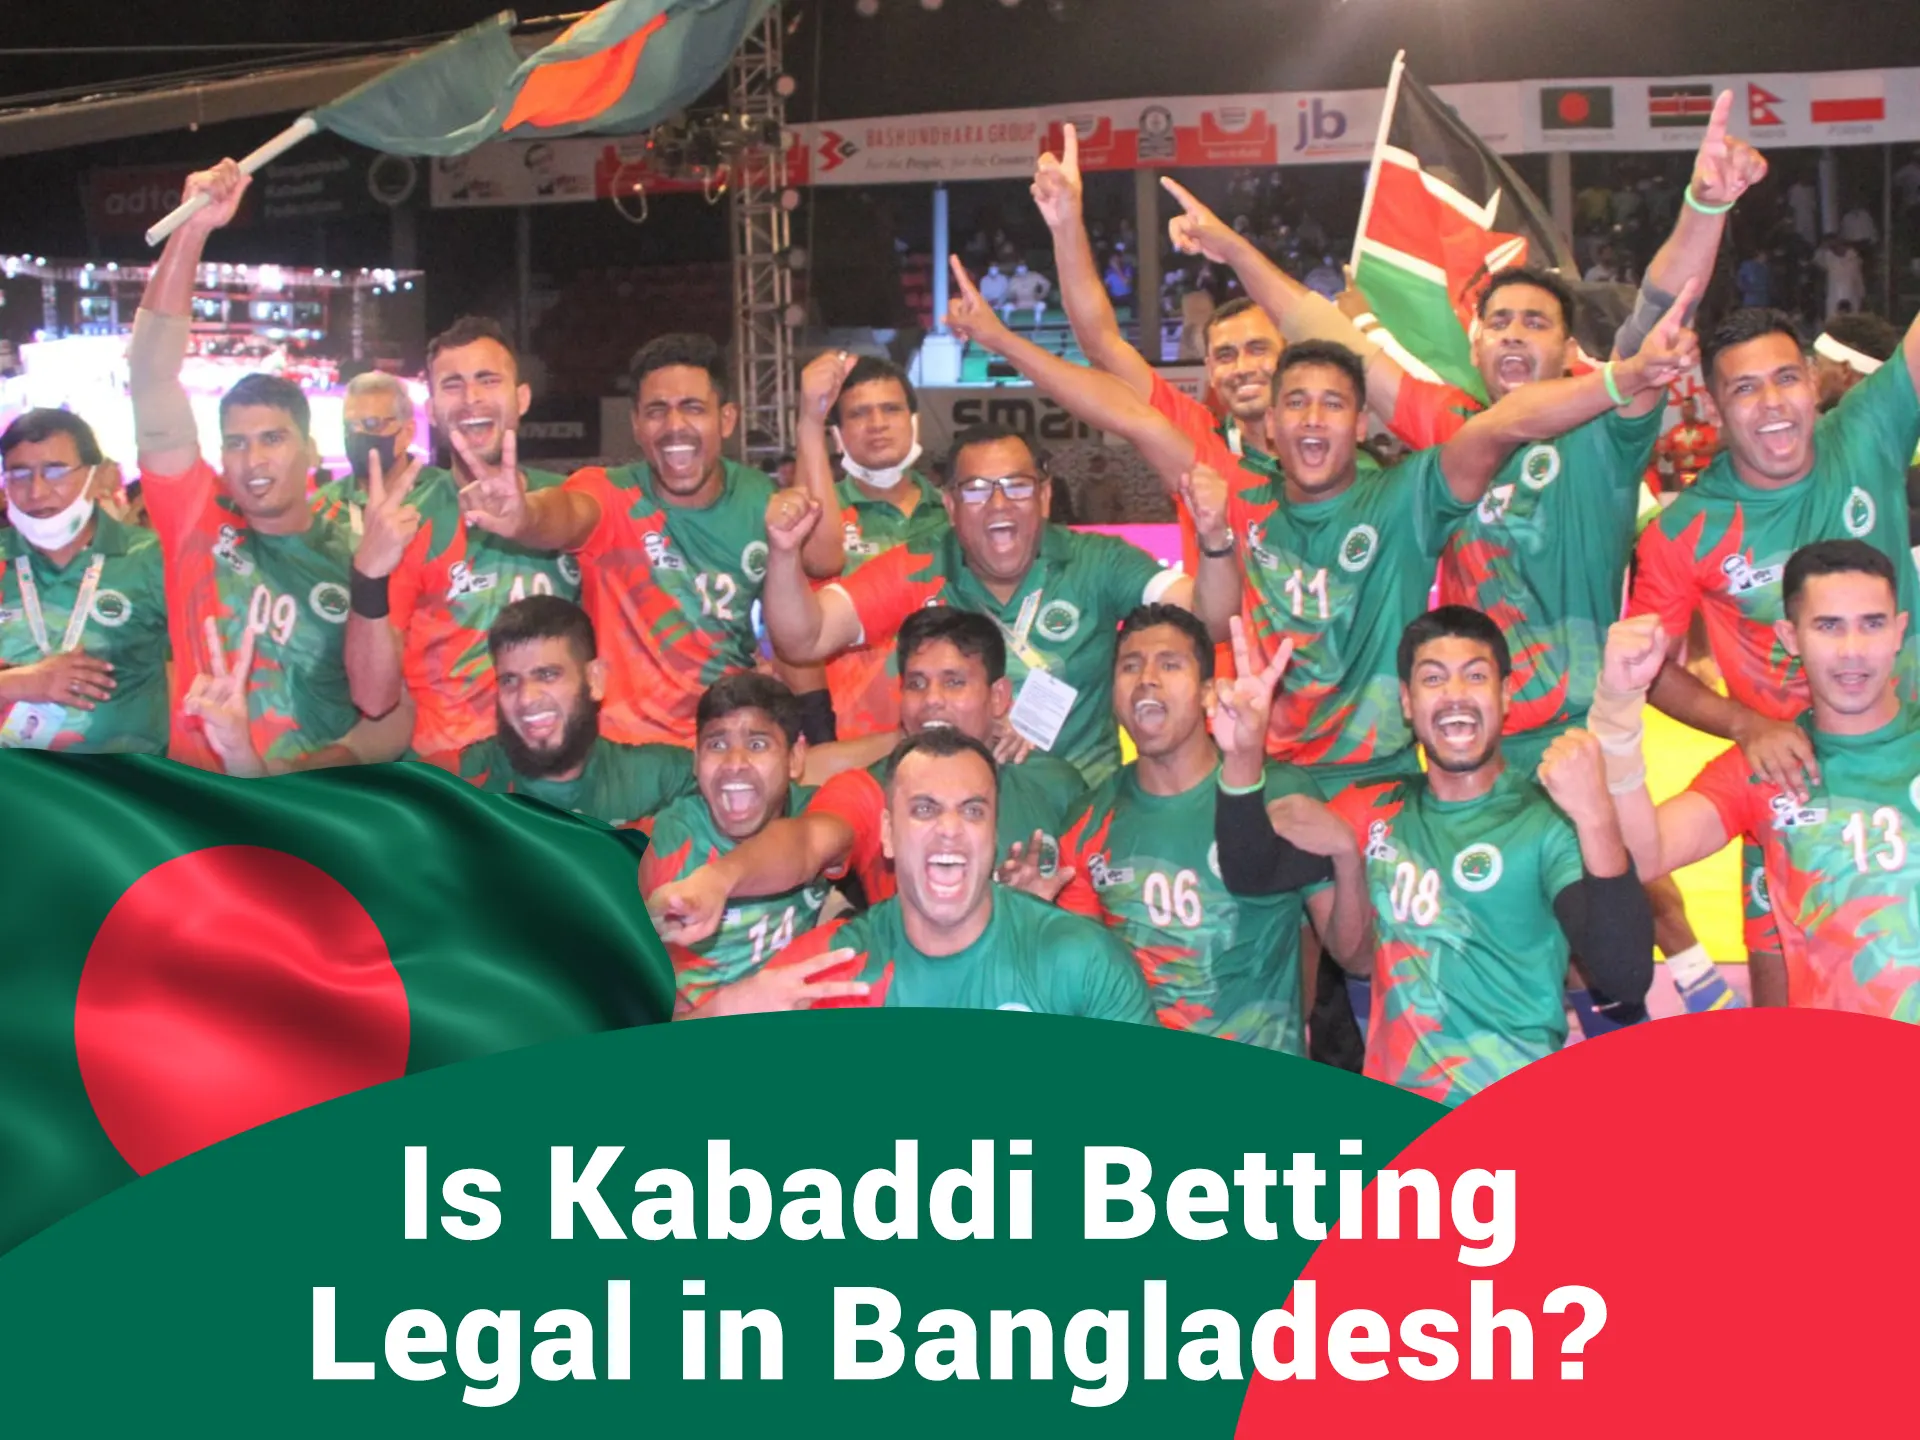 It's fully legal to make bets on kabaddi in Bangladesh.